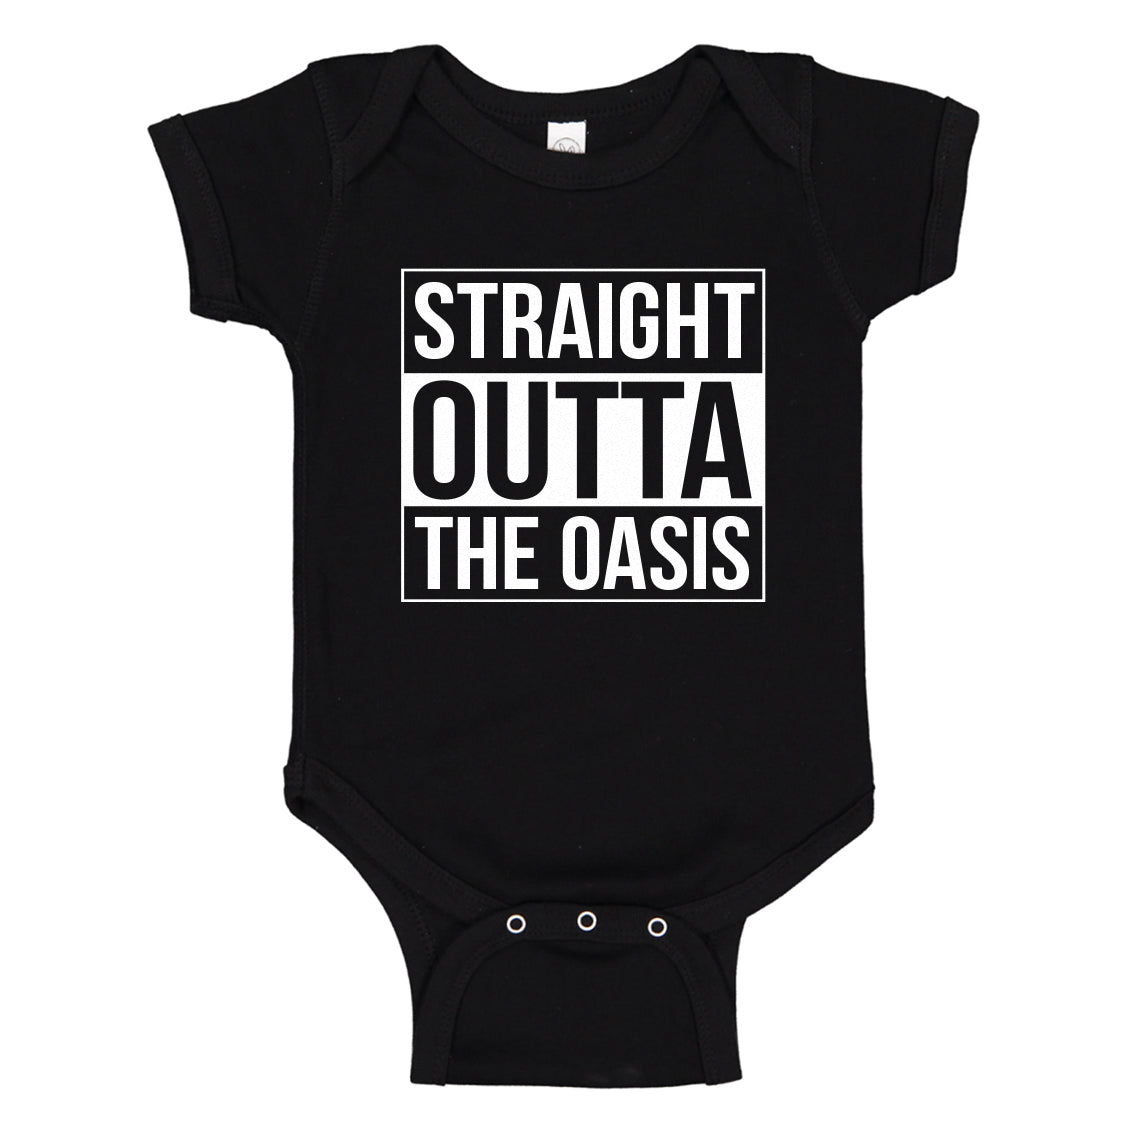 Baby Onesie Straight Outta the Oasis 100% Cotton Infant Bodysuit